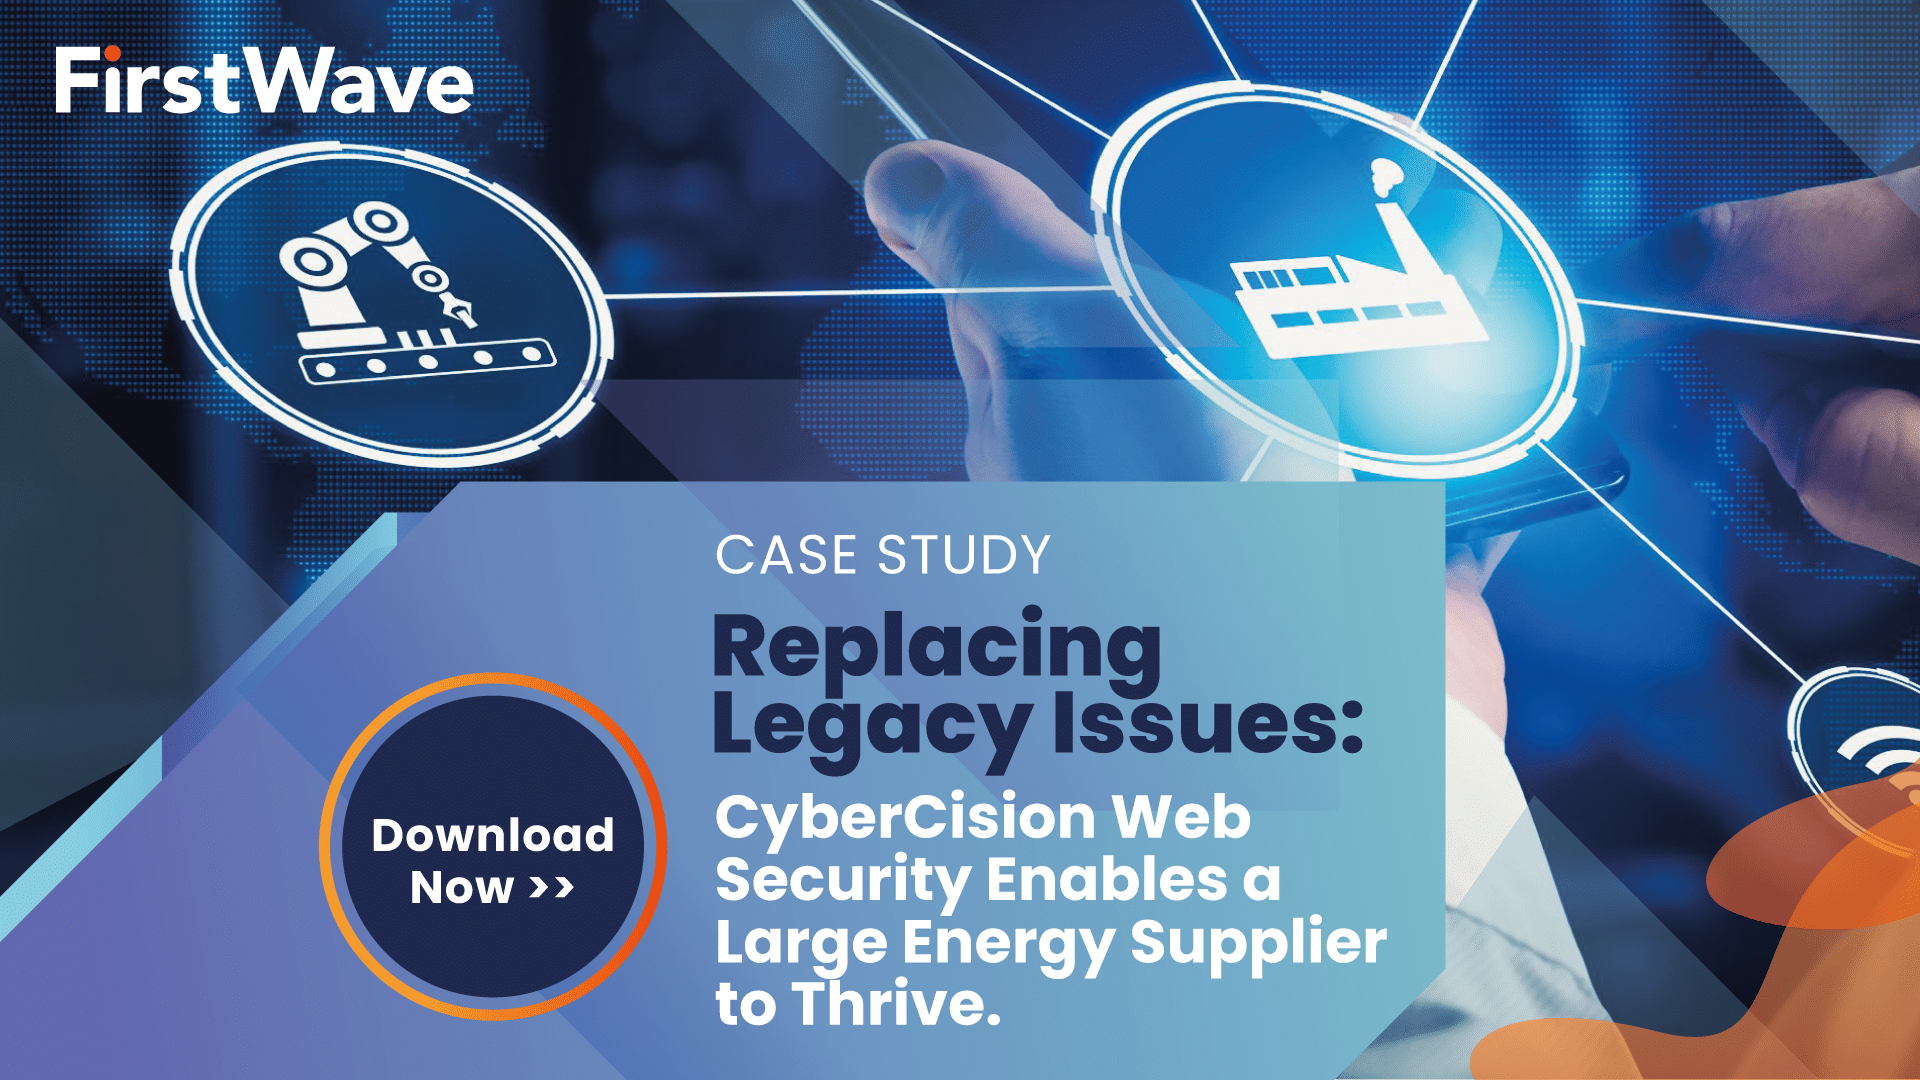 Large Energy Supplier Ensures Bright Future with CyberCision Web Security - Featured Image